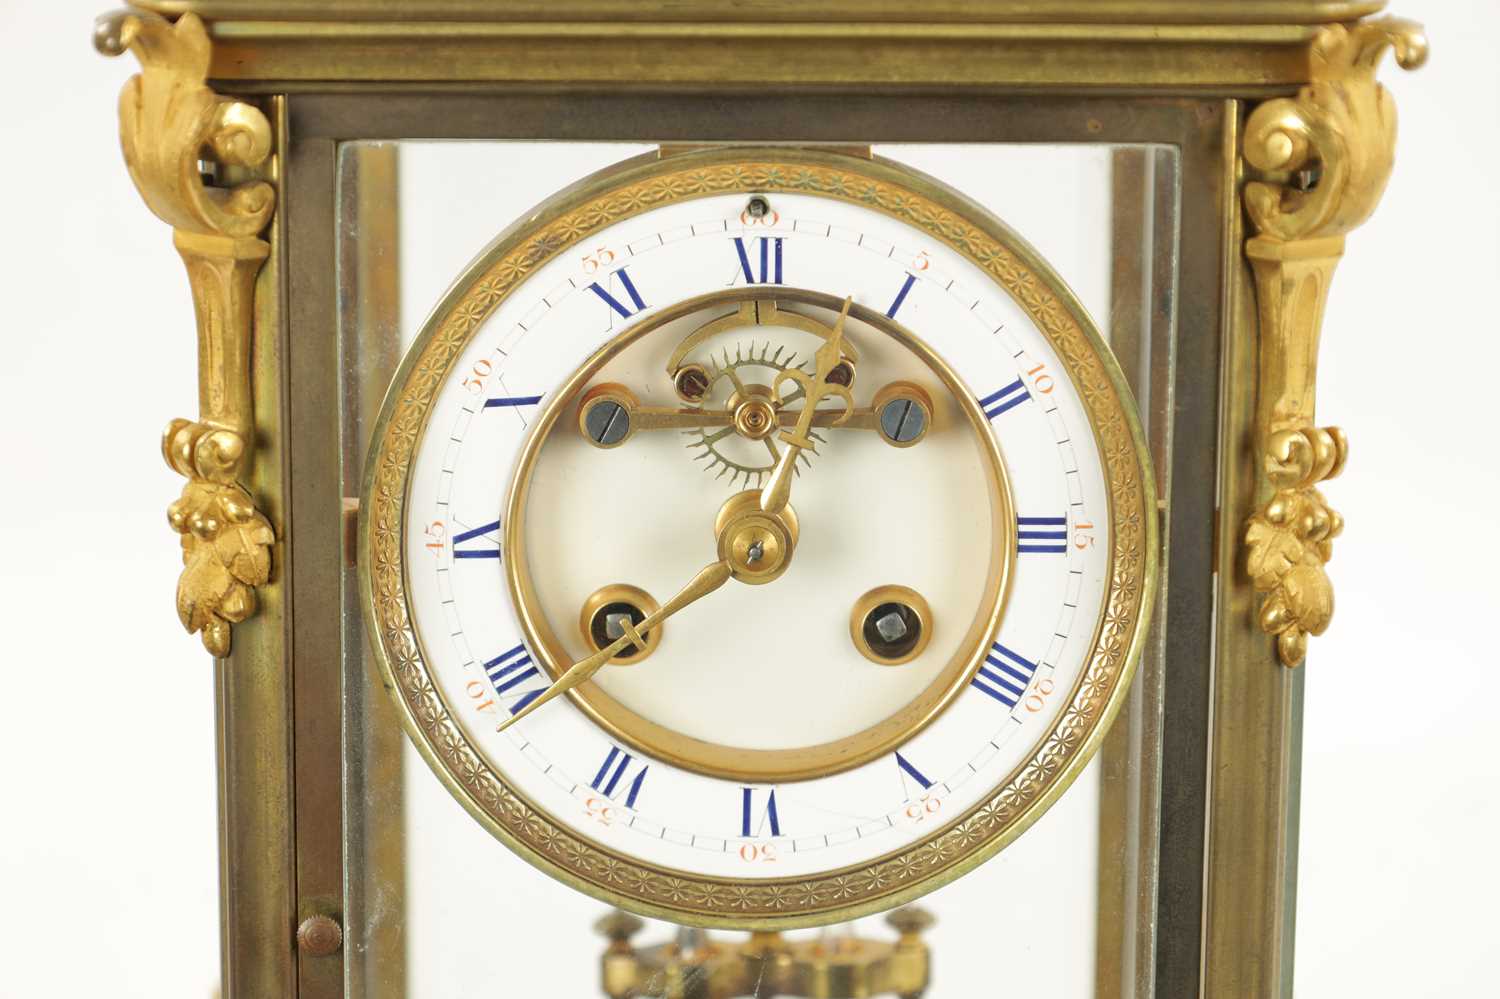 A LATE 19TH CENTURY FRENCH GILT BRASS FOUR-GLASS MANTEL CLOCK - Image 2 of 10